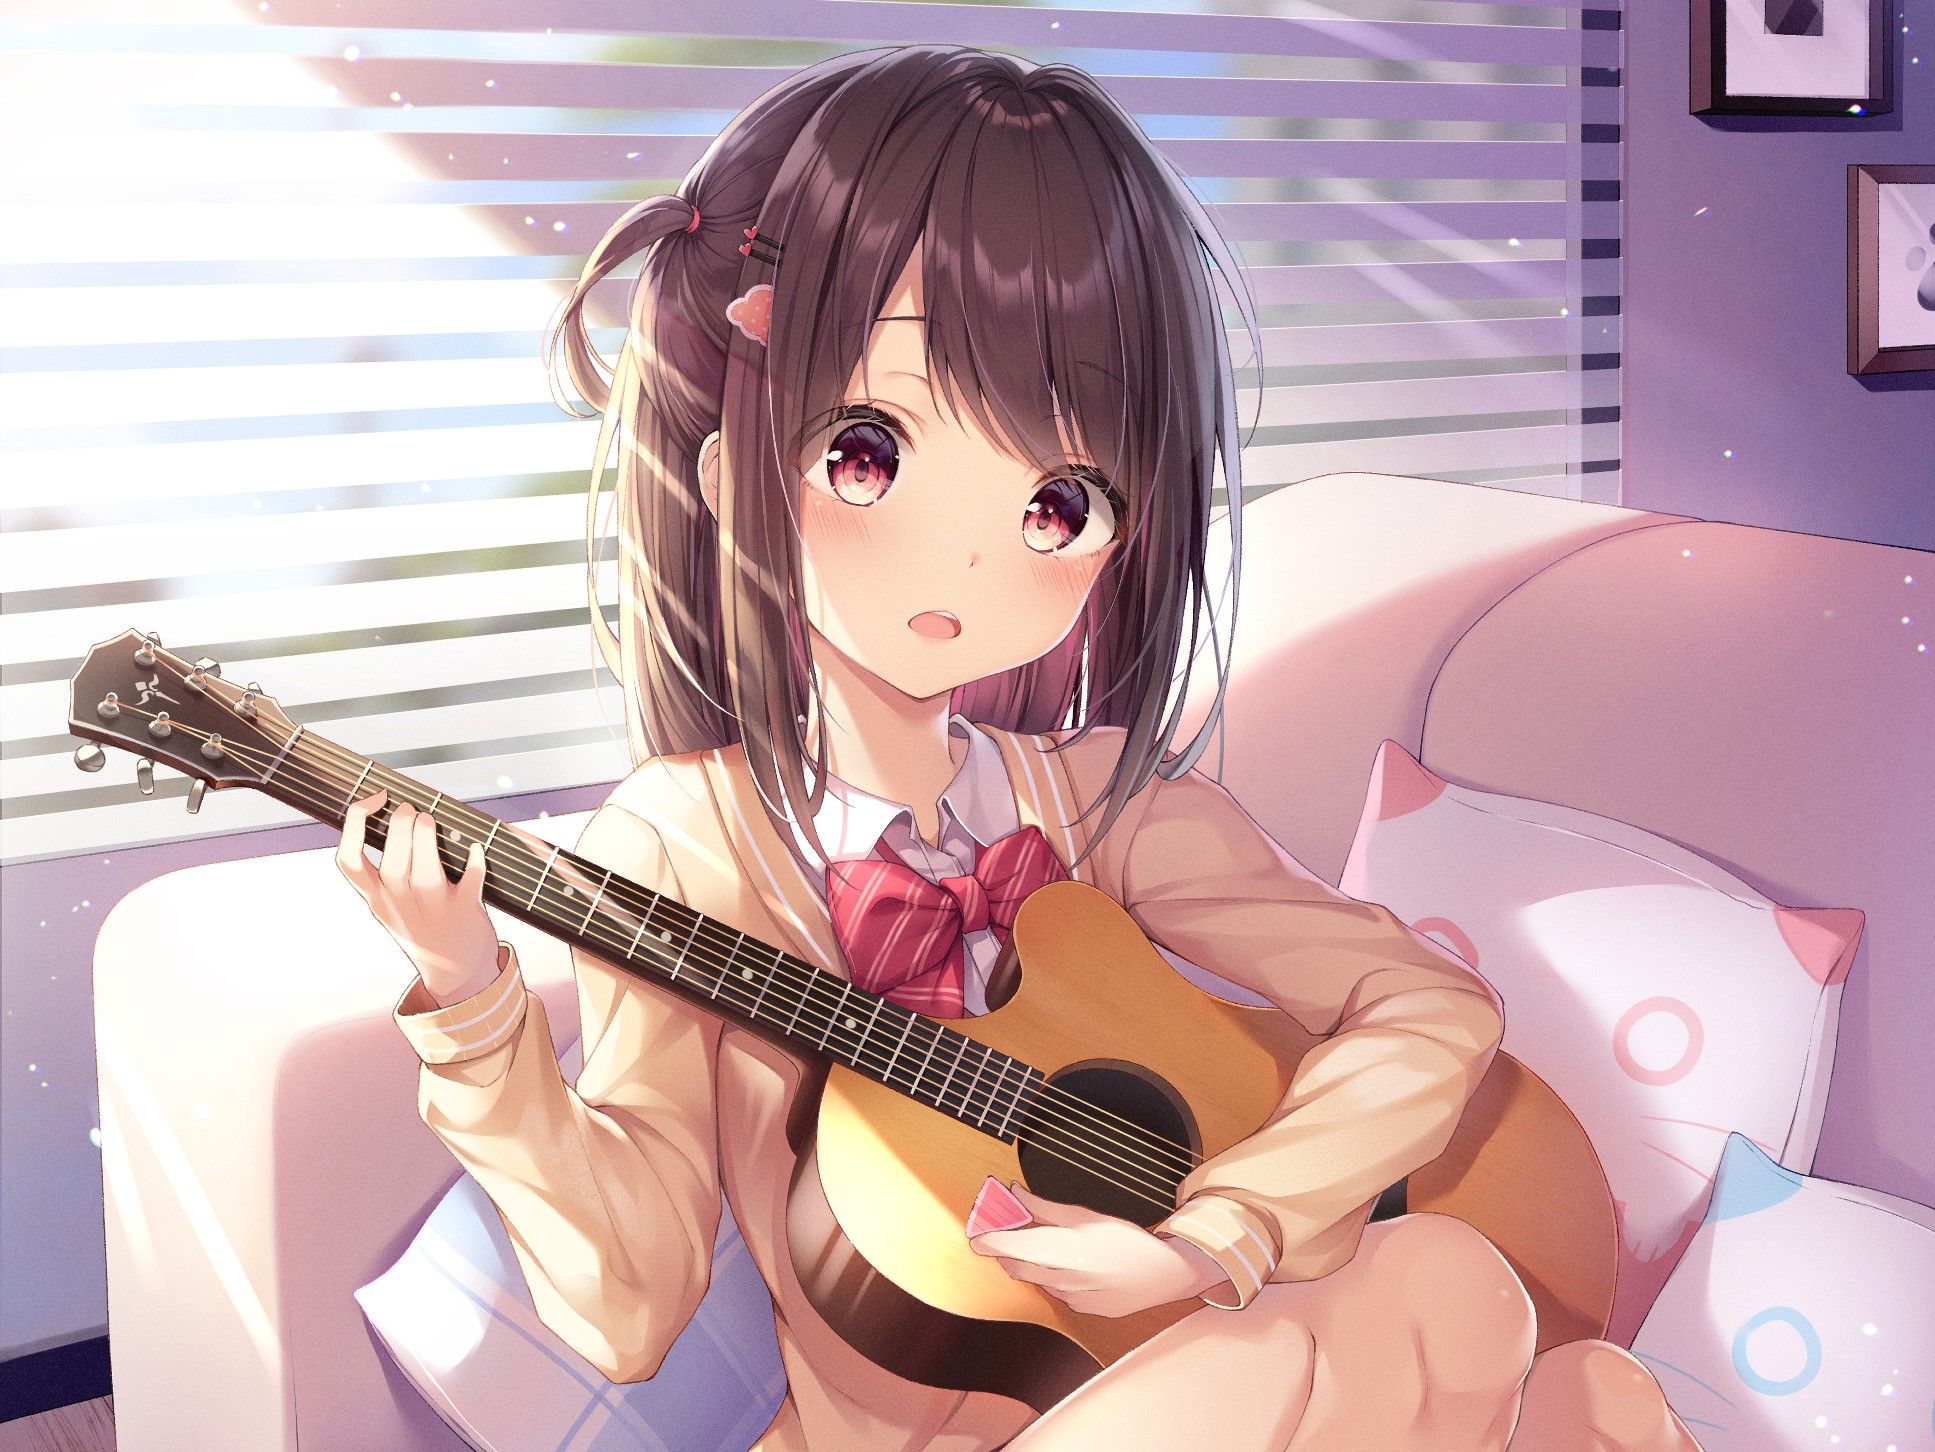 Anime girl playing the guitar HD Wallpaper. Background Image